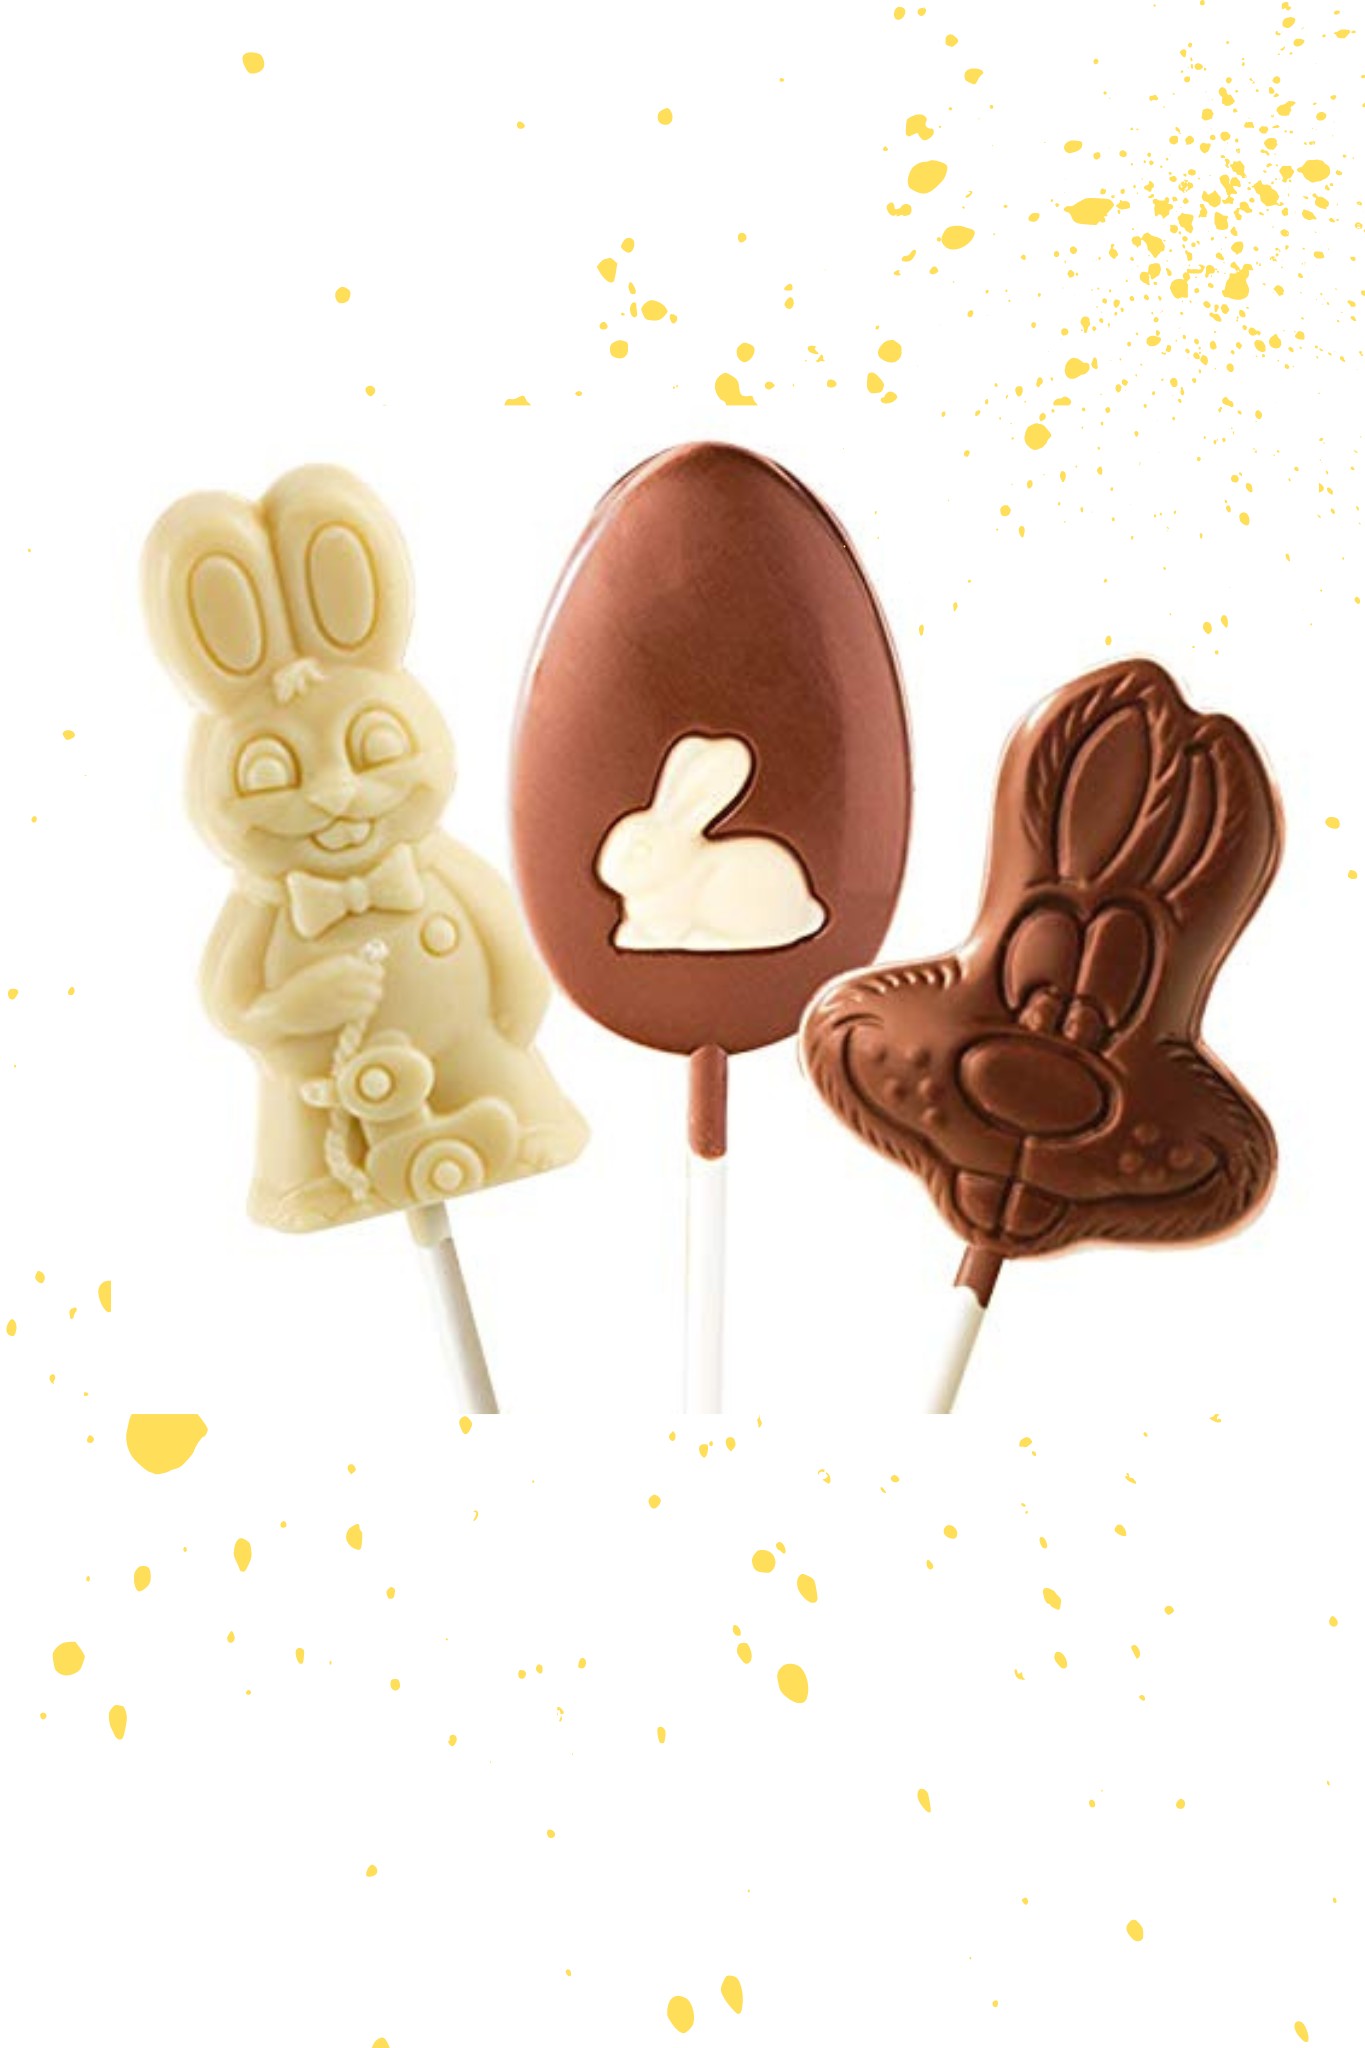 Three chocolate Easter lollipops.